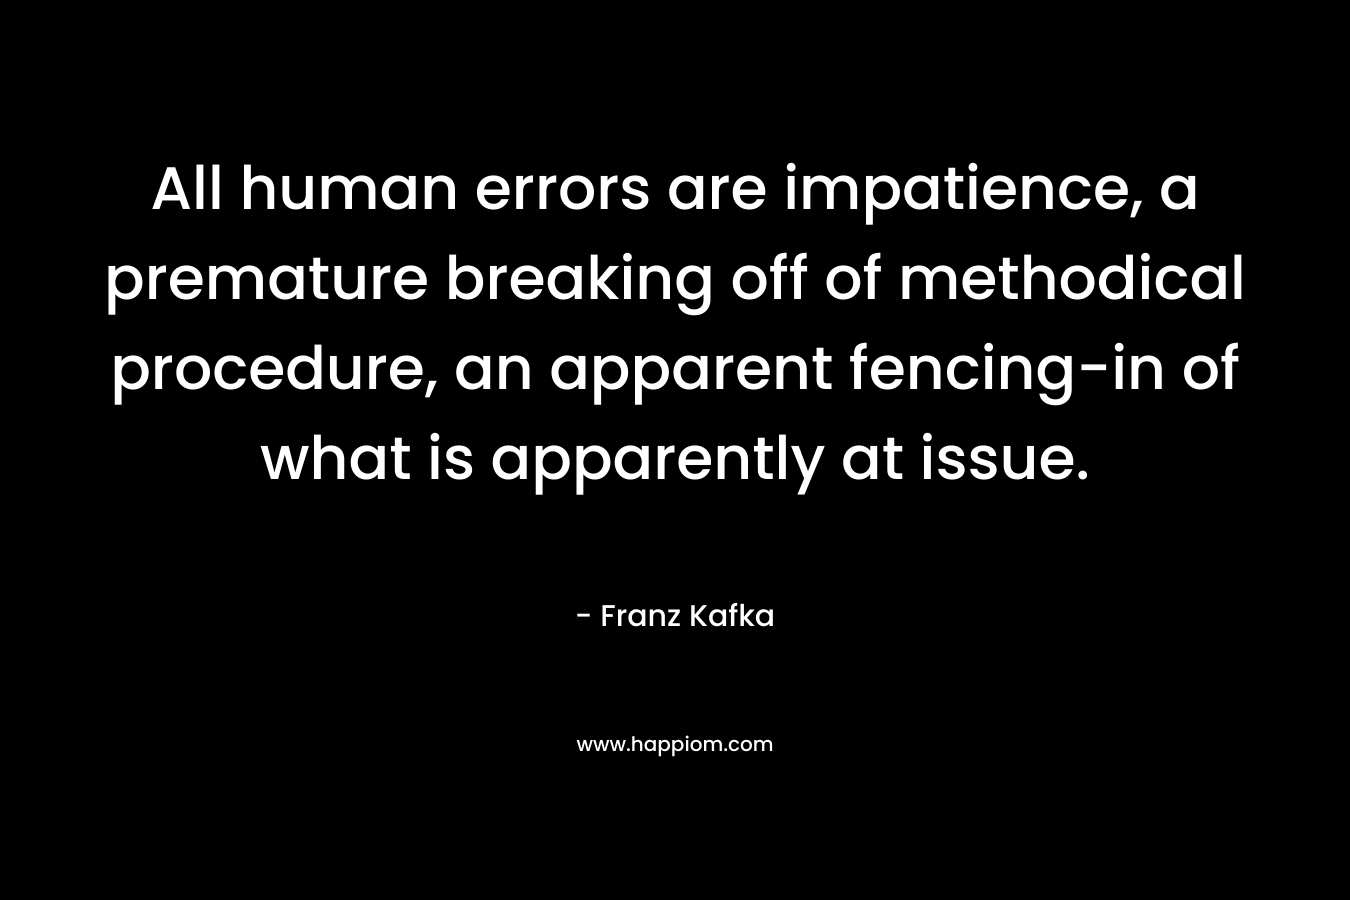 All human errors are impatience, a premature breaking off of methodical procedure, an apparent fencing-in of what is apparently at issue.